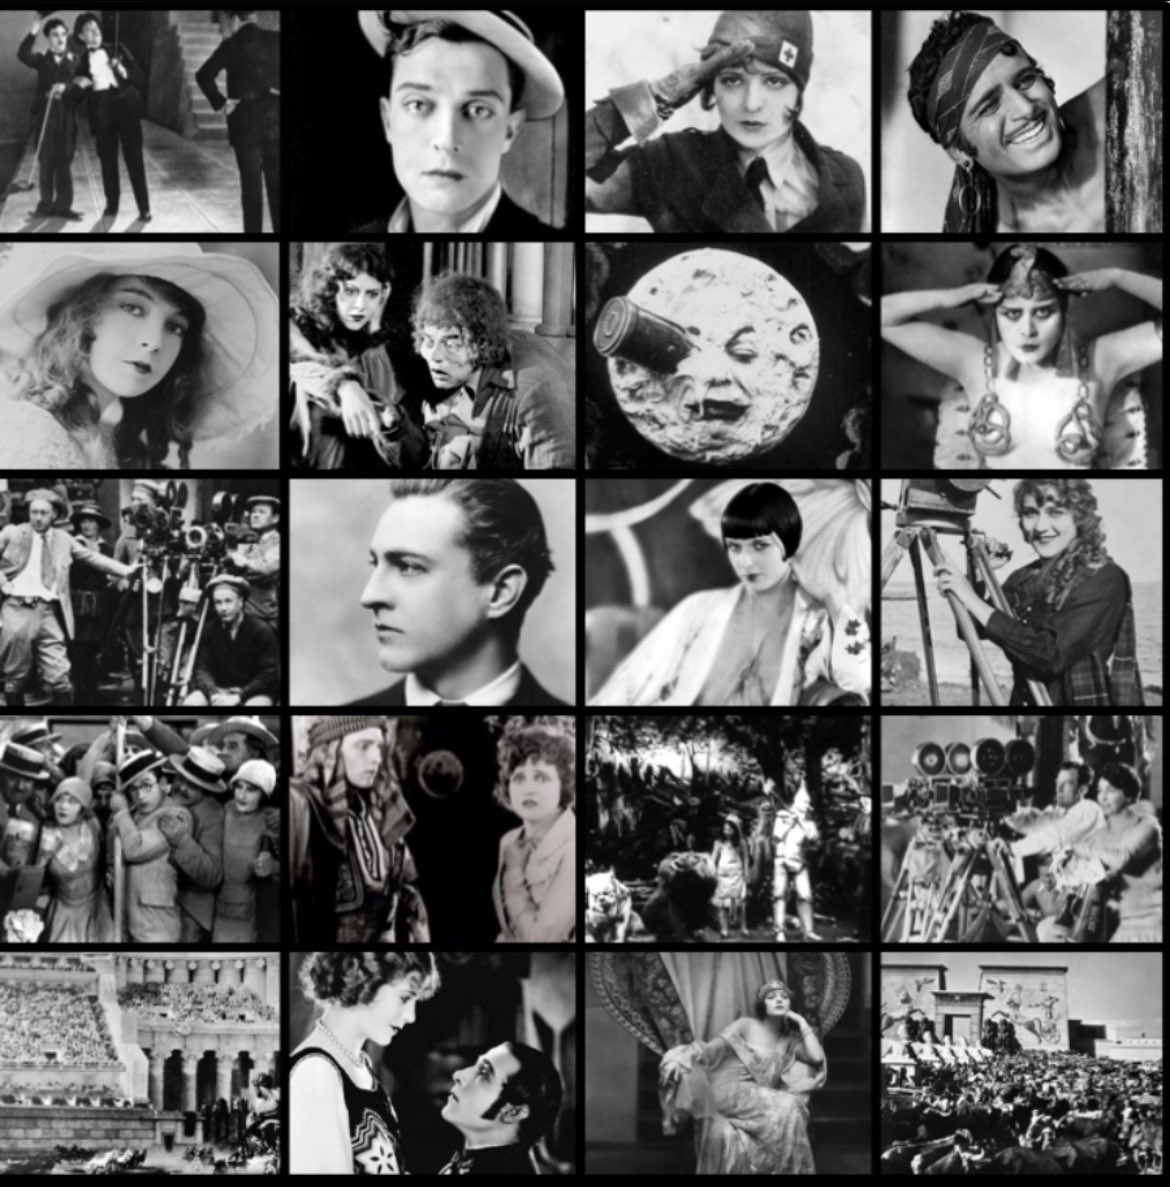 #FF Follow Friday - Celebrating a magnificent, and often misunderstood art form that must be seen to be fully appreciated: @MoviesSilently moviessilently.com #silentmovie #silentfilm #OnePictureIsWorthAThousandWords